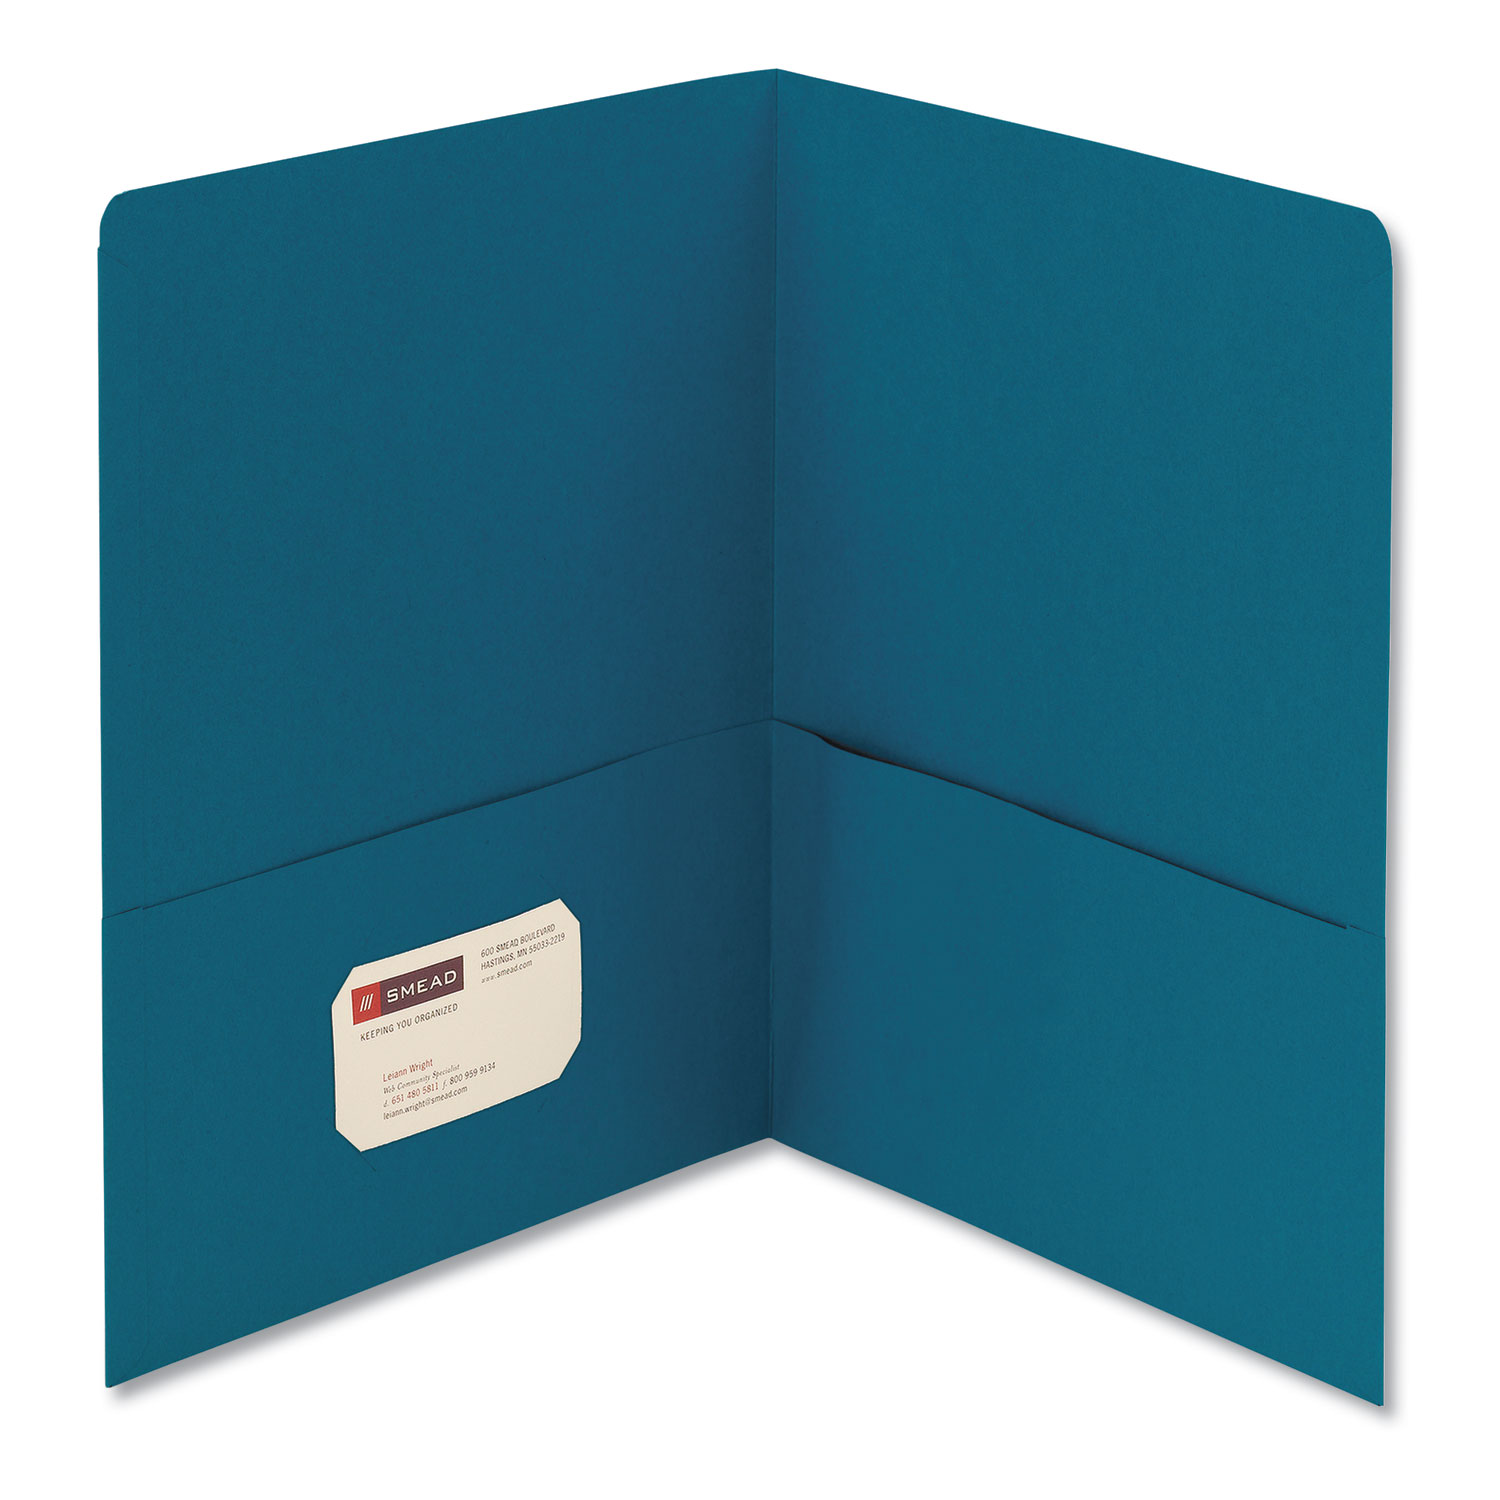  Smead 87867 Two-Pocket Folder, Textured Paper, Teal, 25/Box (SMD87867) 